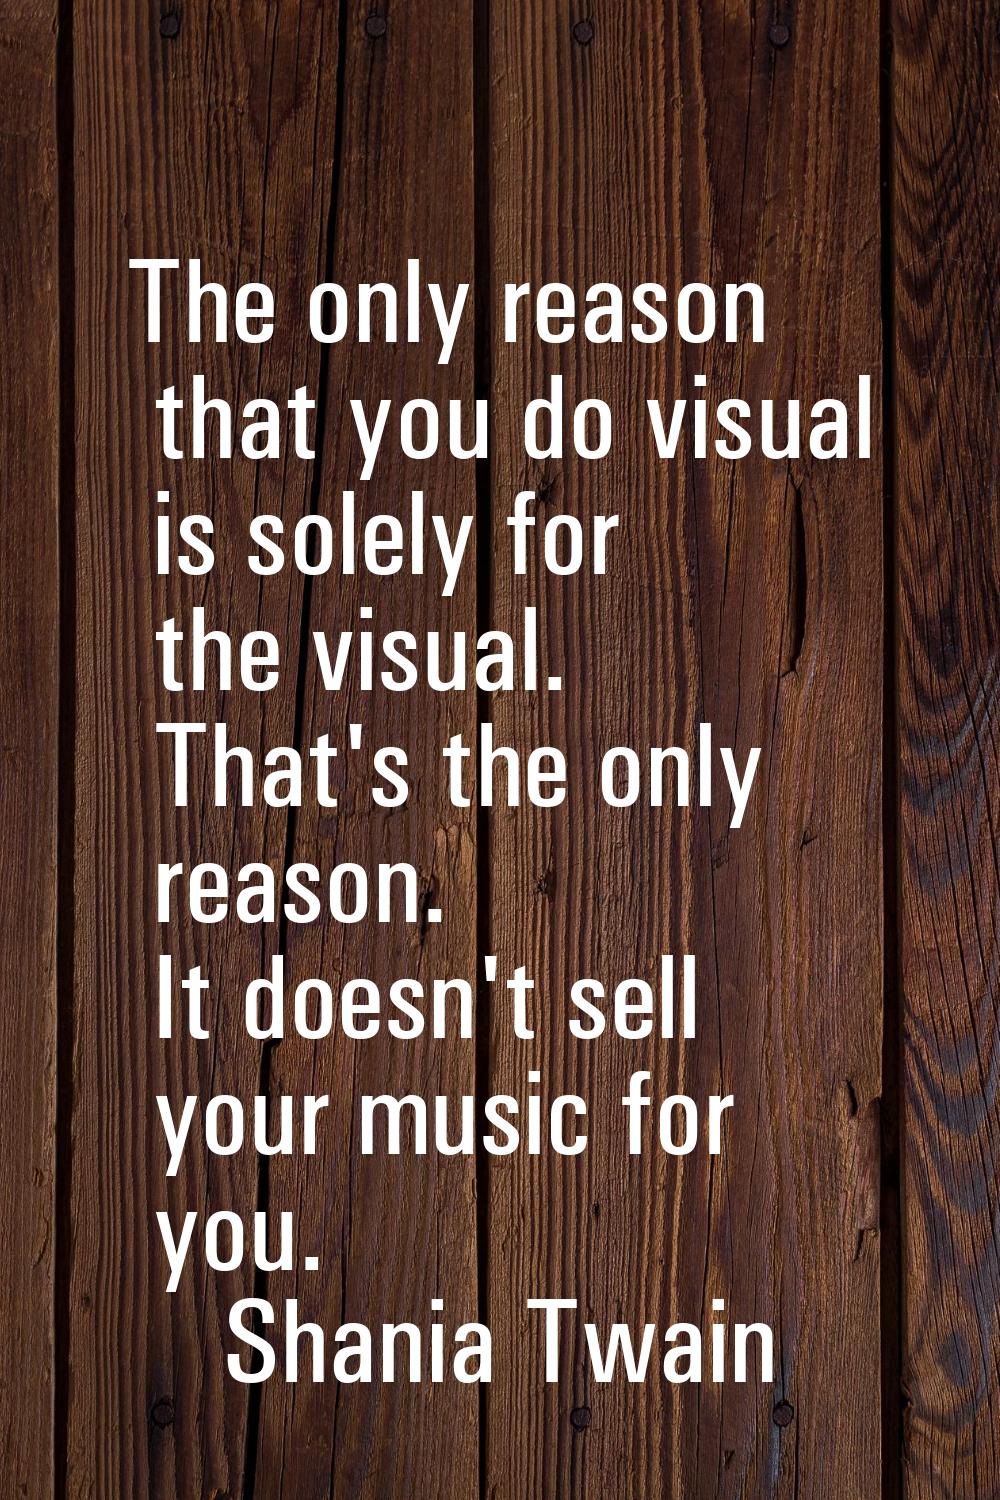 The only reason that you do visual is solely for the visual. That's the only reason. It doesn't sel